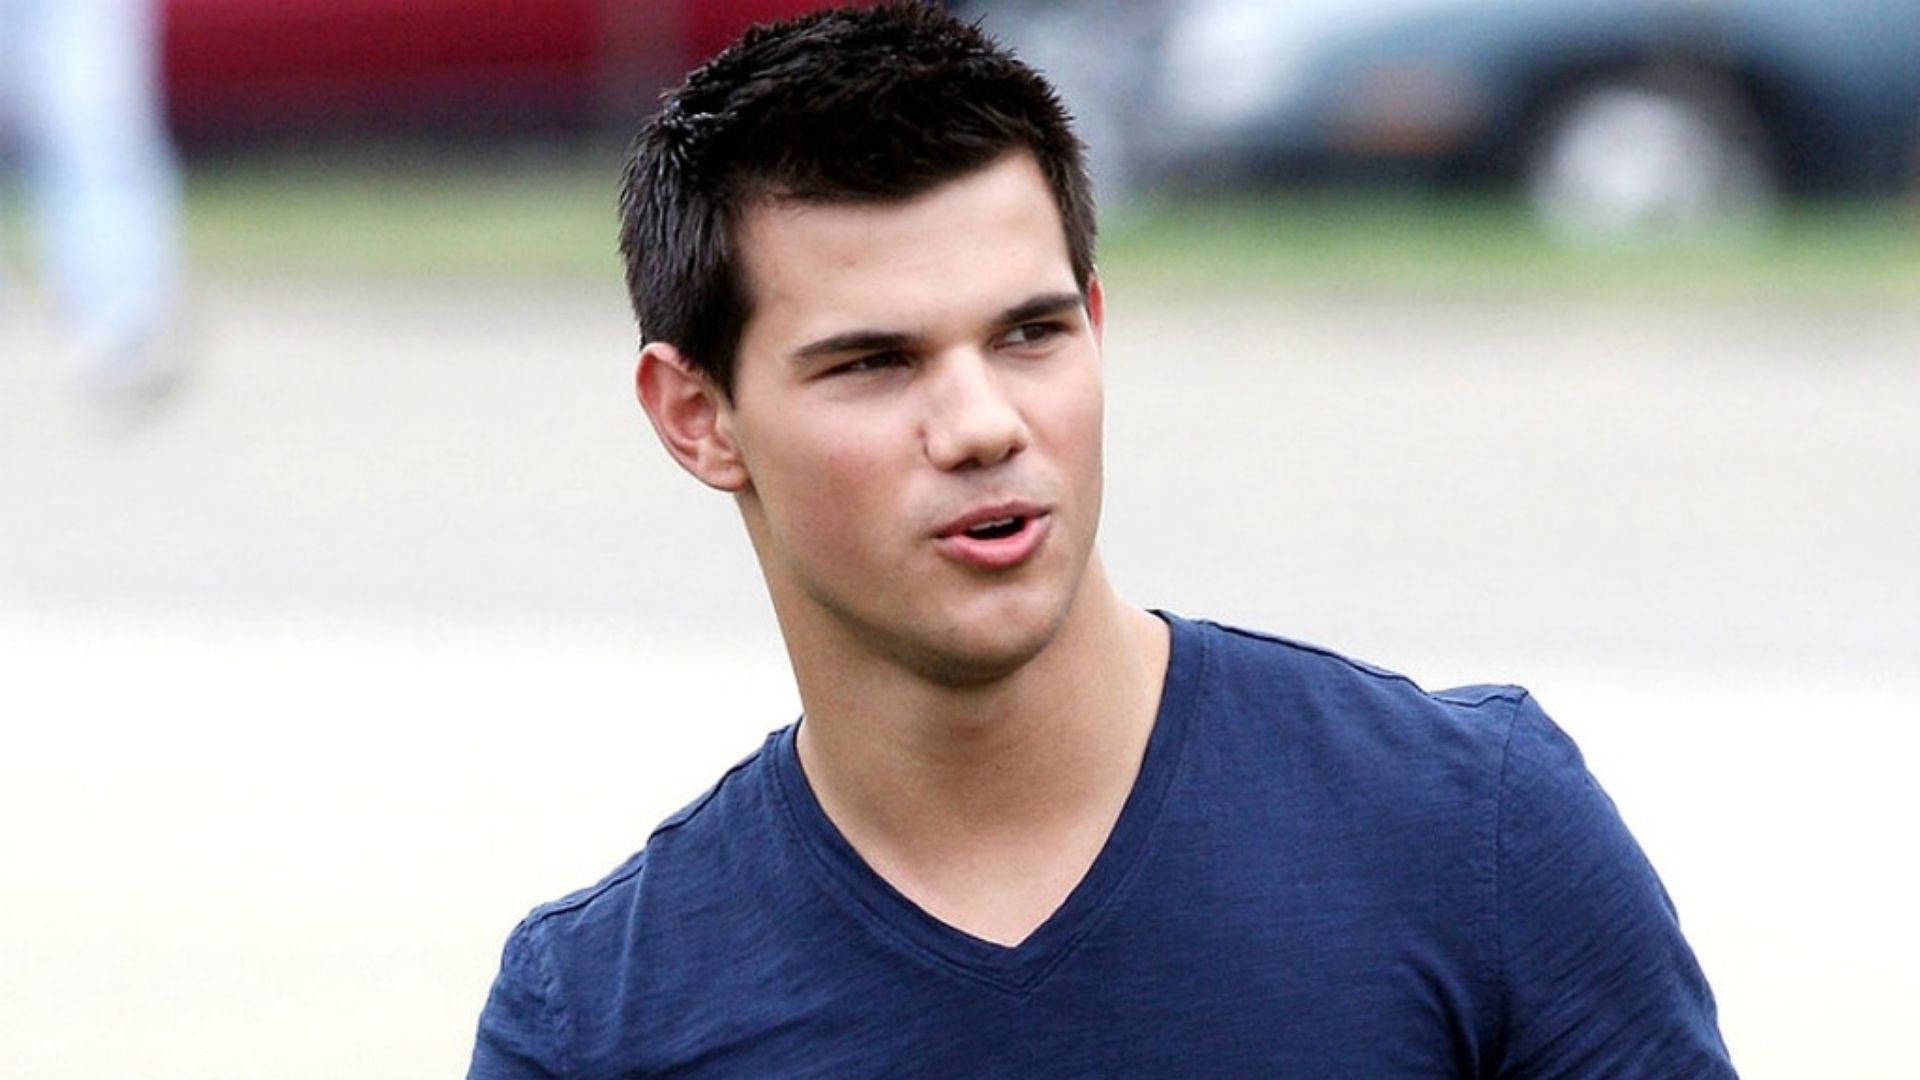 Taylorlautner Tittar Bort (when Referring To A Computer Or Mobile Wallpaper Featuring A Photo Of Taylor Lautner Looking Away) Wallpaper